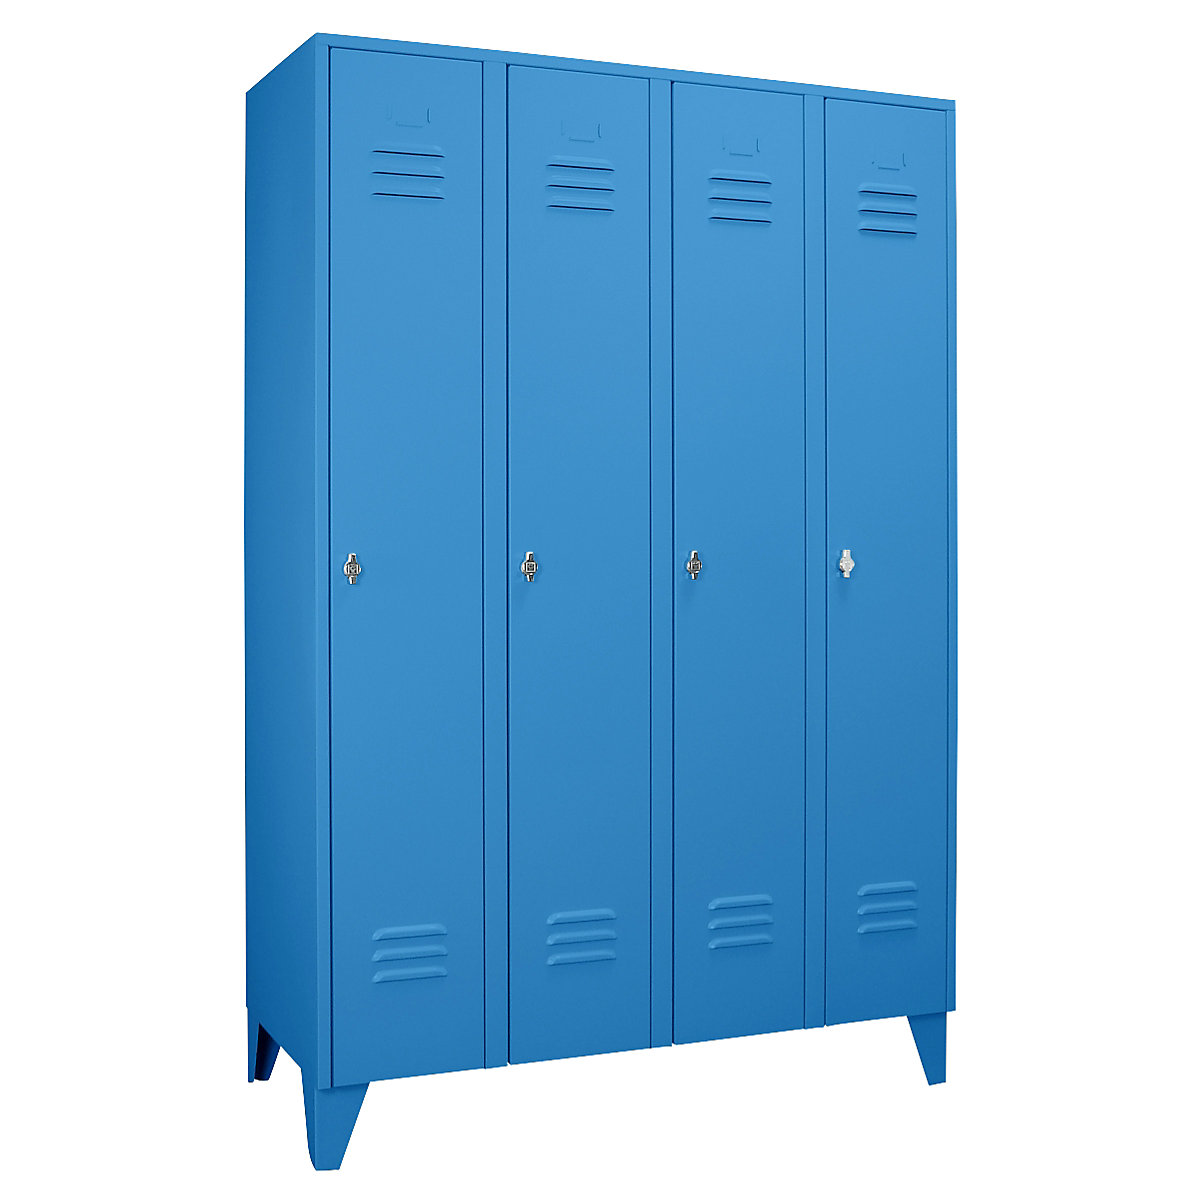 Steel locker with stud feet – Wolf, full height compartments, solid doors, compartment width 300 mm, 4 compartments, light blue-21